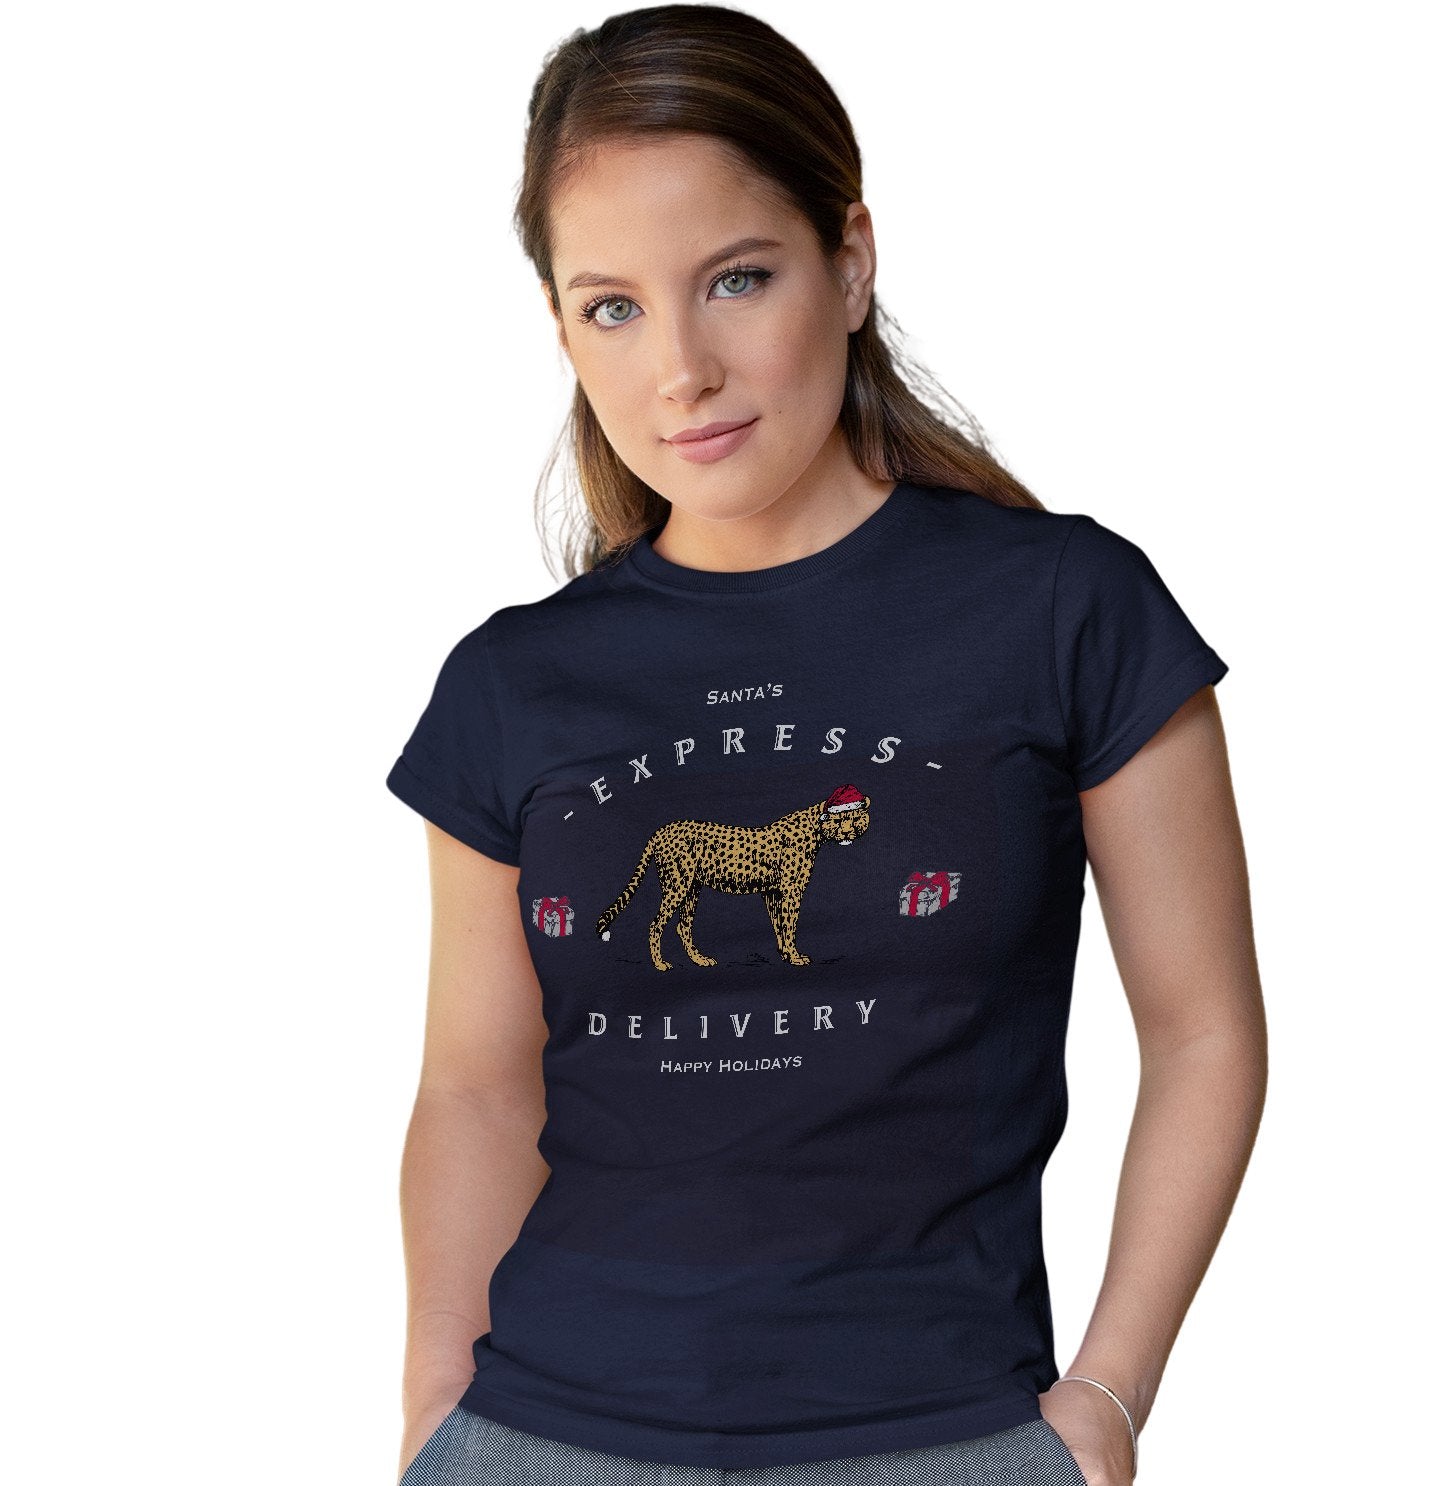 Cheetah Express Delivery - Women's Fitted T-Shirt